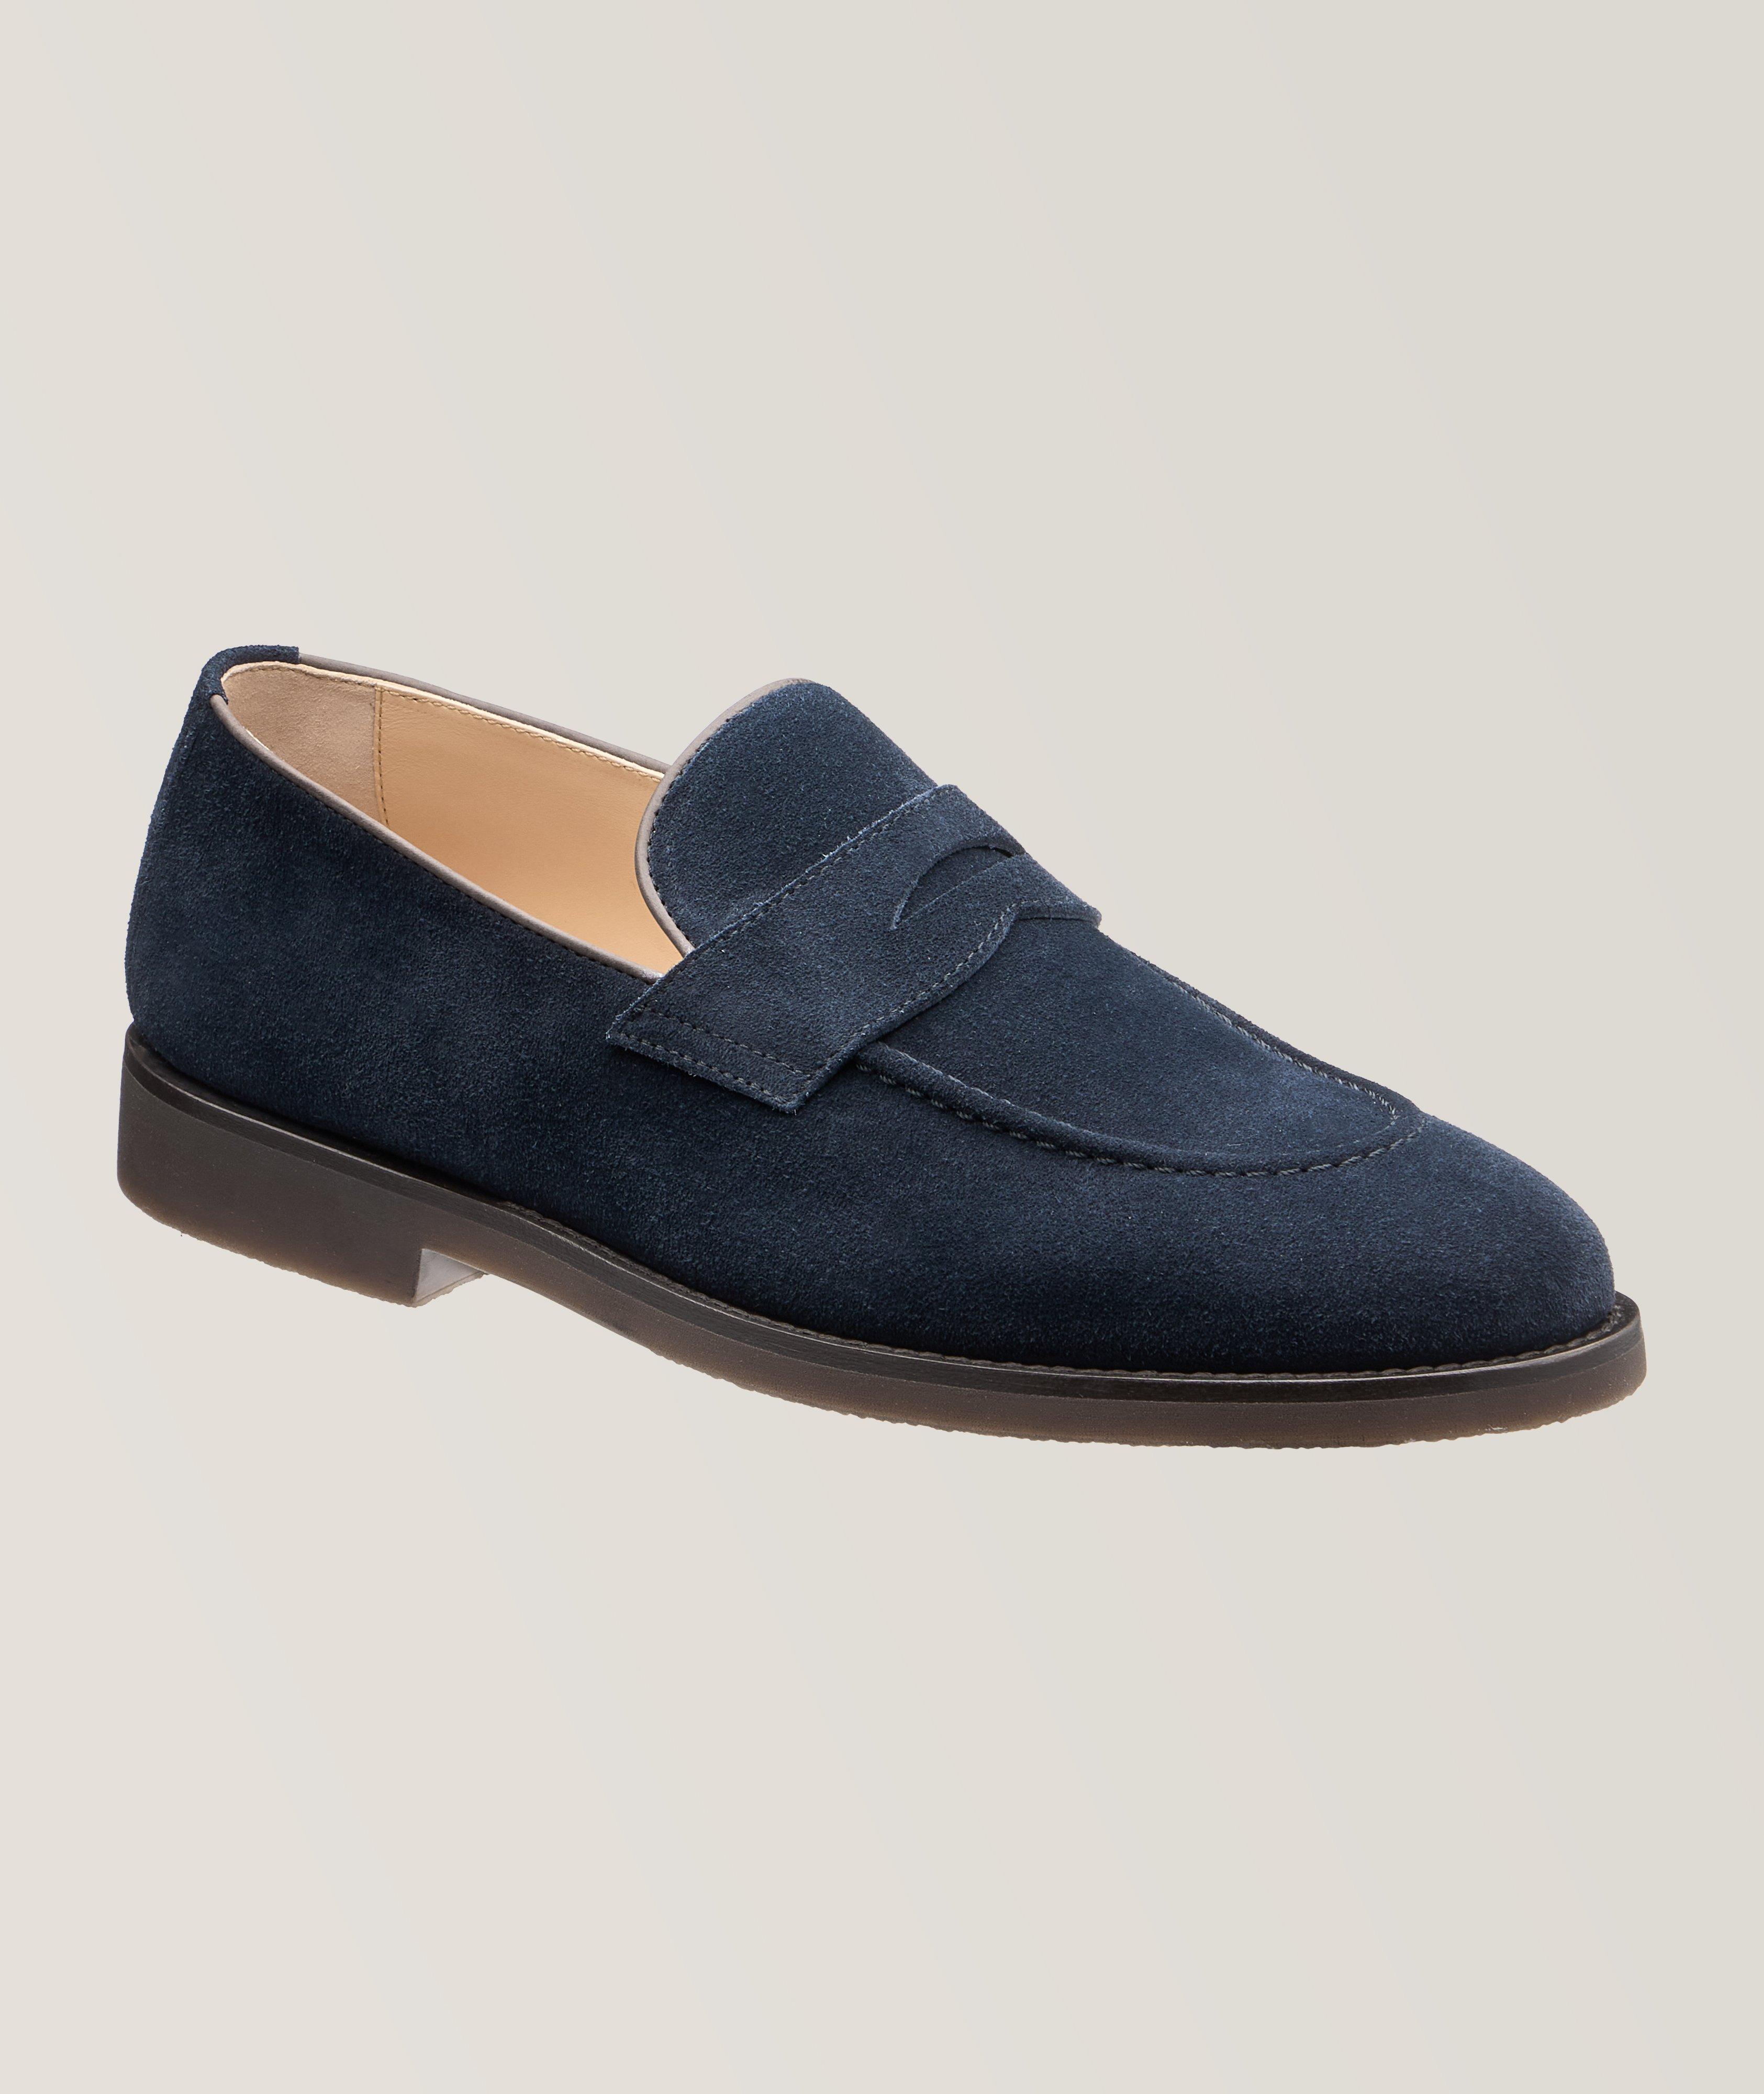 Suede Leather Loafers image 0